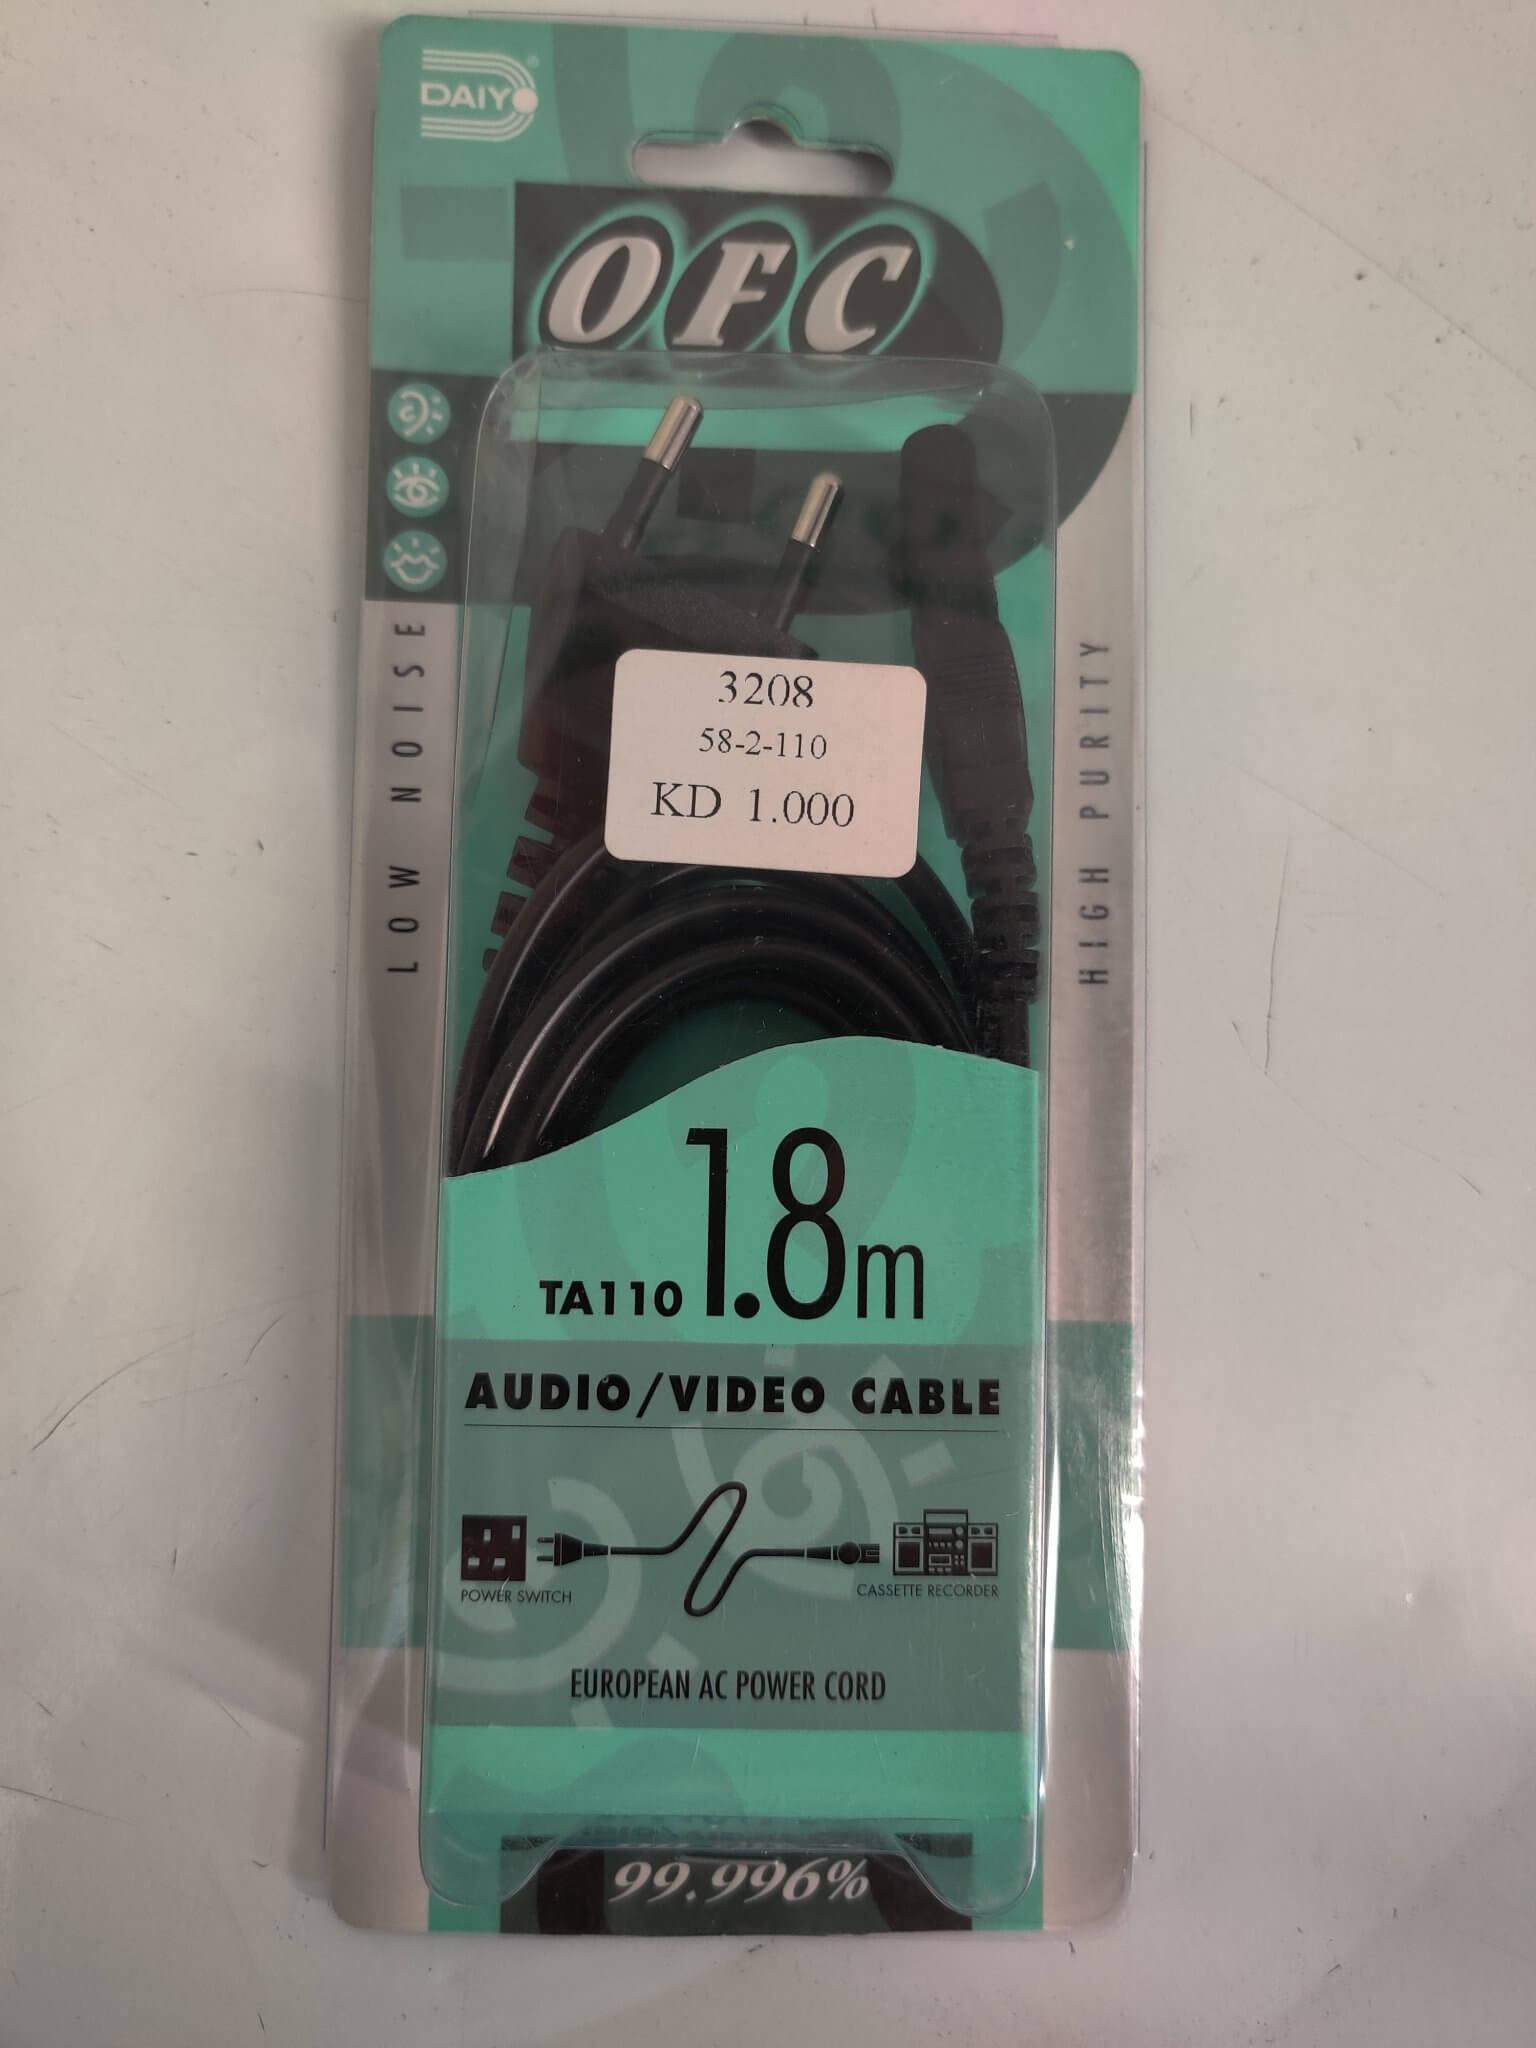 NEW DAIY OFC TA110 1.8m Audio Video Cable European AC Power Cord - MBR Medicals